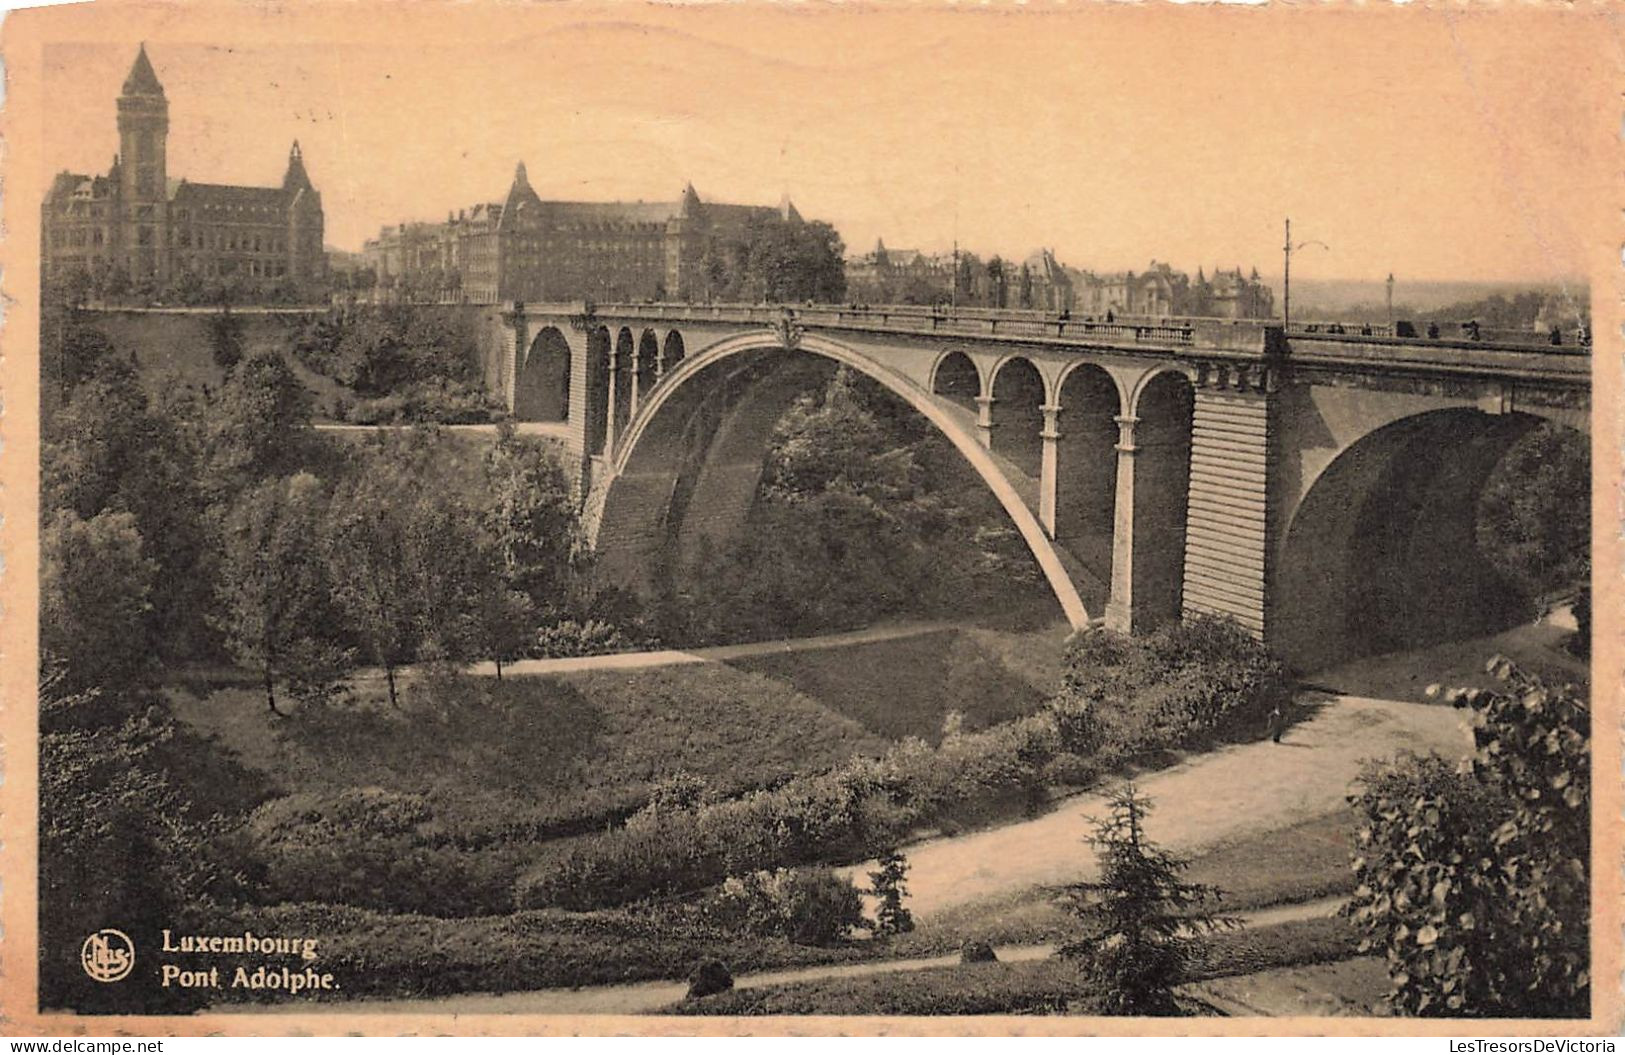 LUXEMBOURG - Luxembourg Ville - Pont Adolphe - Carte Postale Ancienne - Luxemburg - Stadt